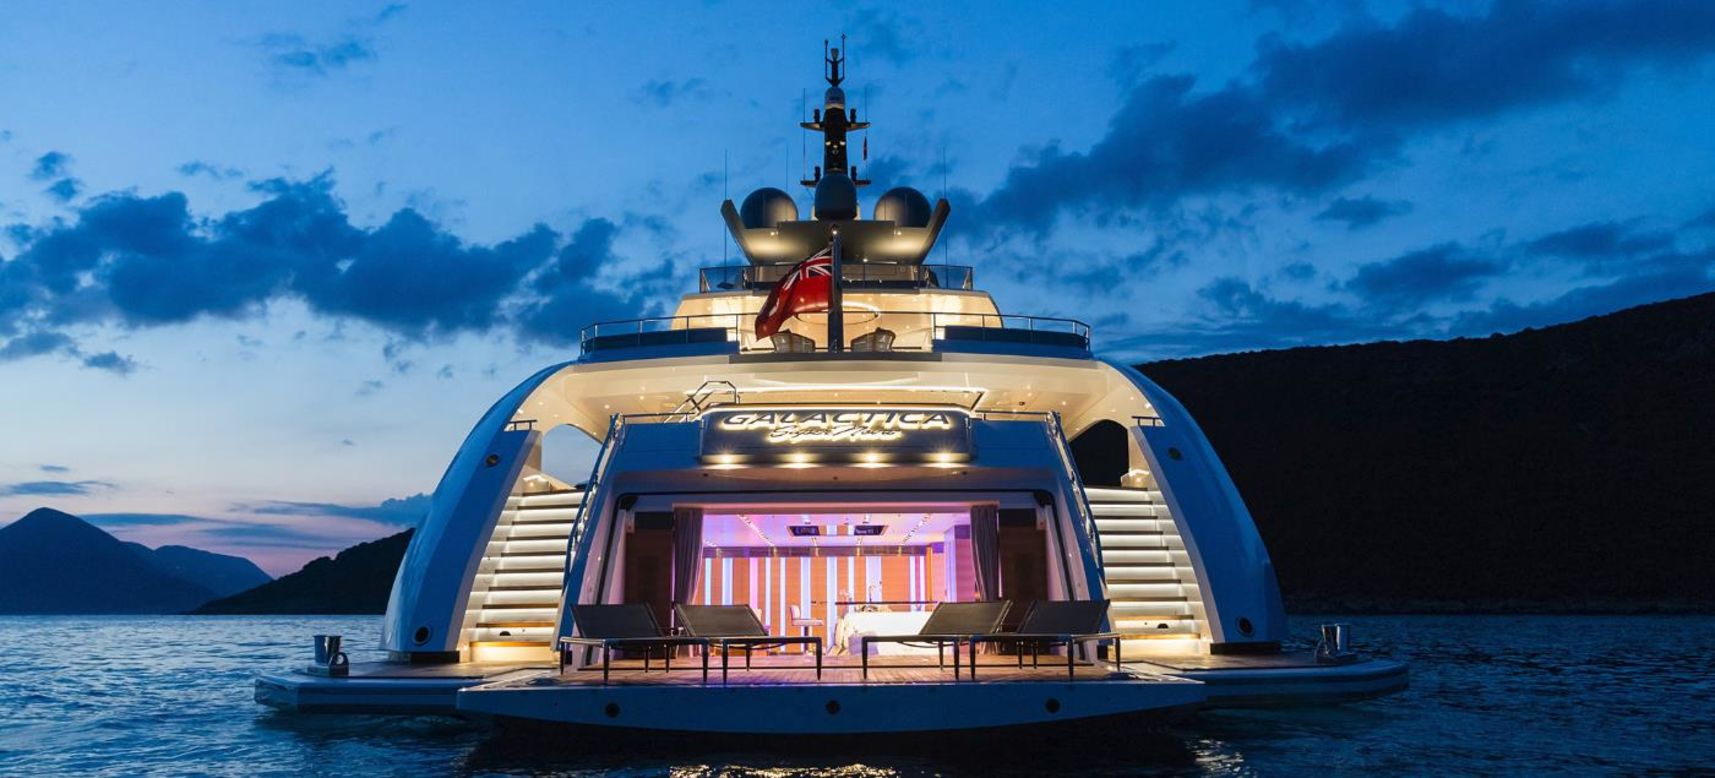 With a top speed of 30 knots (35 mph), she is one of the fastest superyachts in the world. Galactica Supernova combines high speed with long range and low fuel consumption.